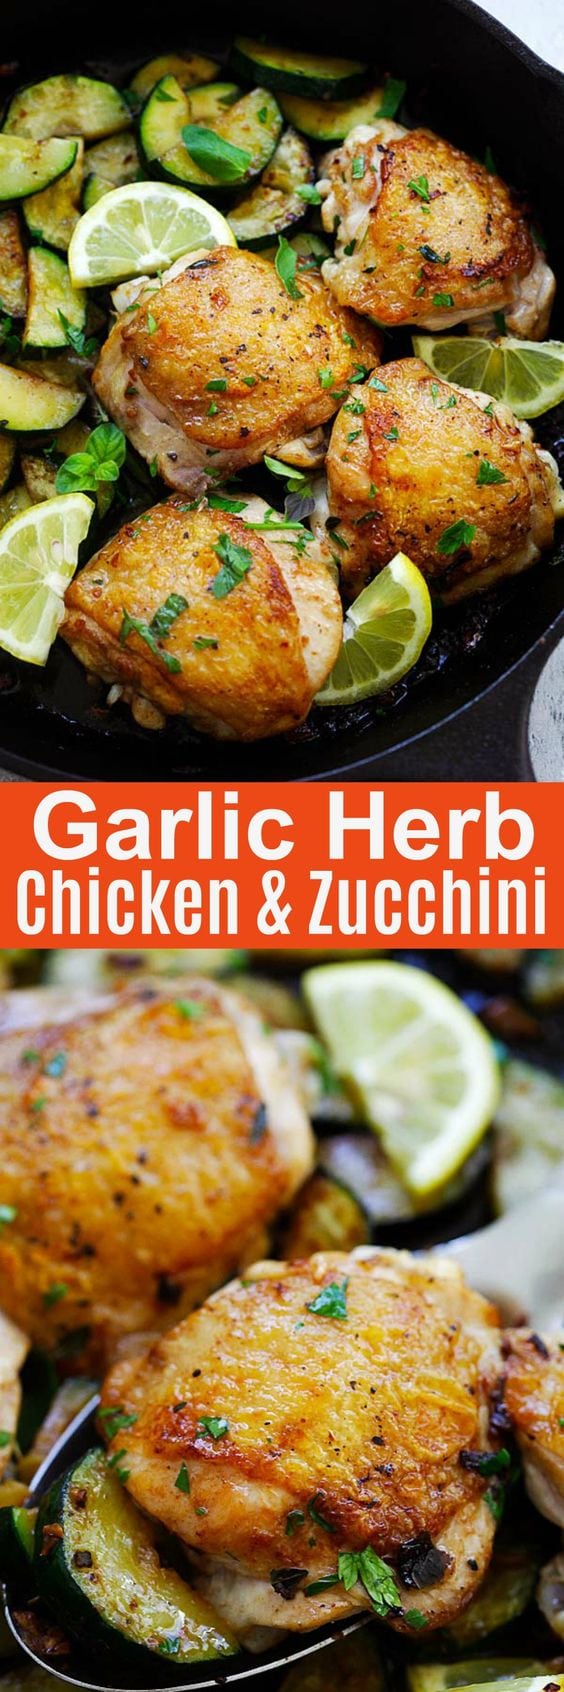 Garlic Herb Chicken and Zucchini - a quick and easy one-pot recipe with delicious and flavorful chicken and zucchini cooked with garlic, oregano, thyme, white wine and parsley | rasamalaysia.com